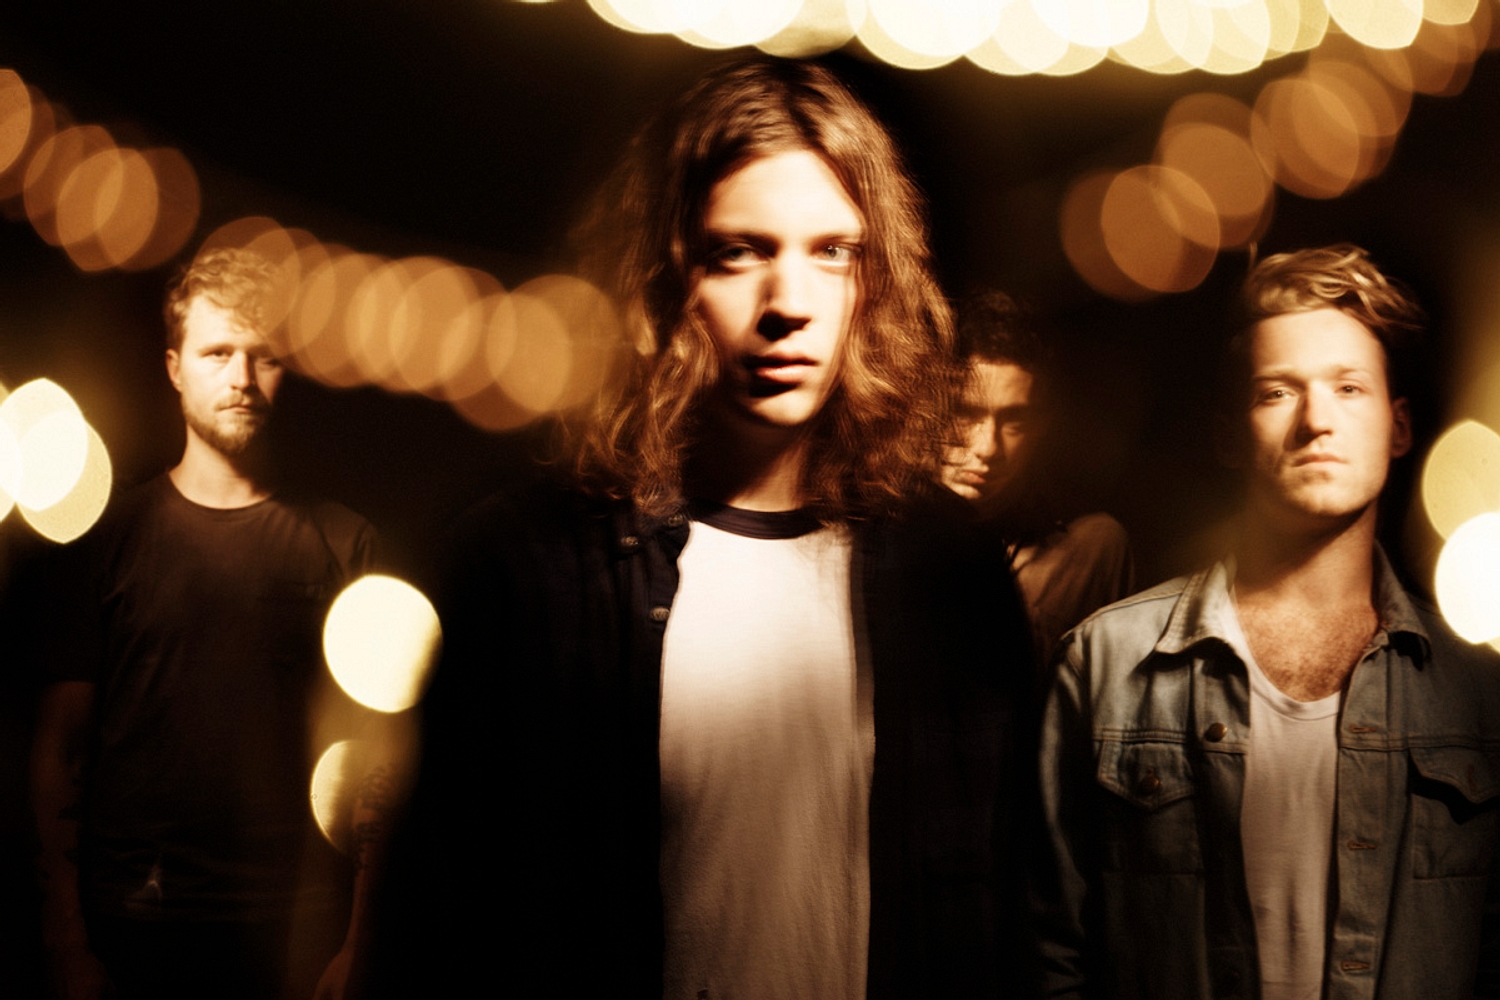 VANT, INHEAVEN and The Big Moon to play DIY Presents the Neu Tour 2015